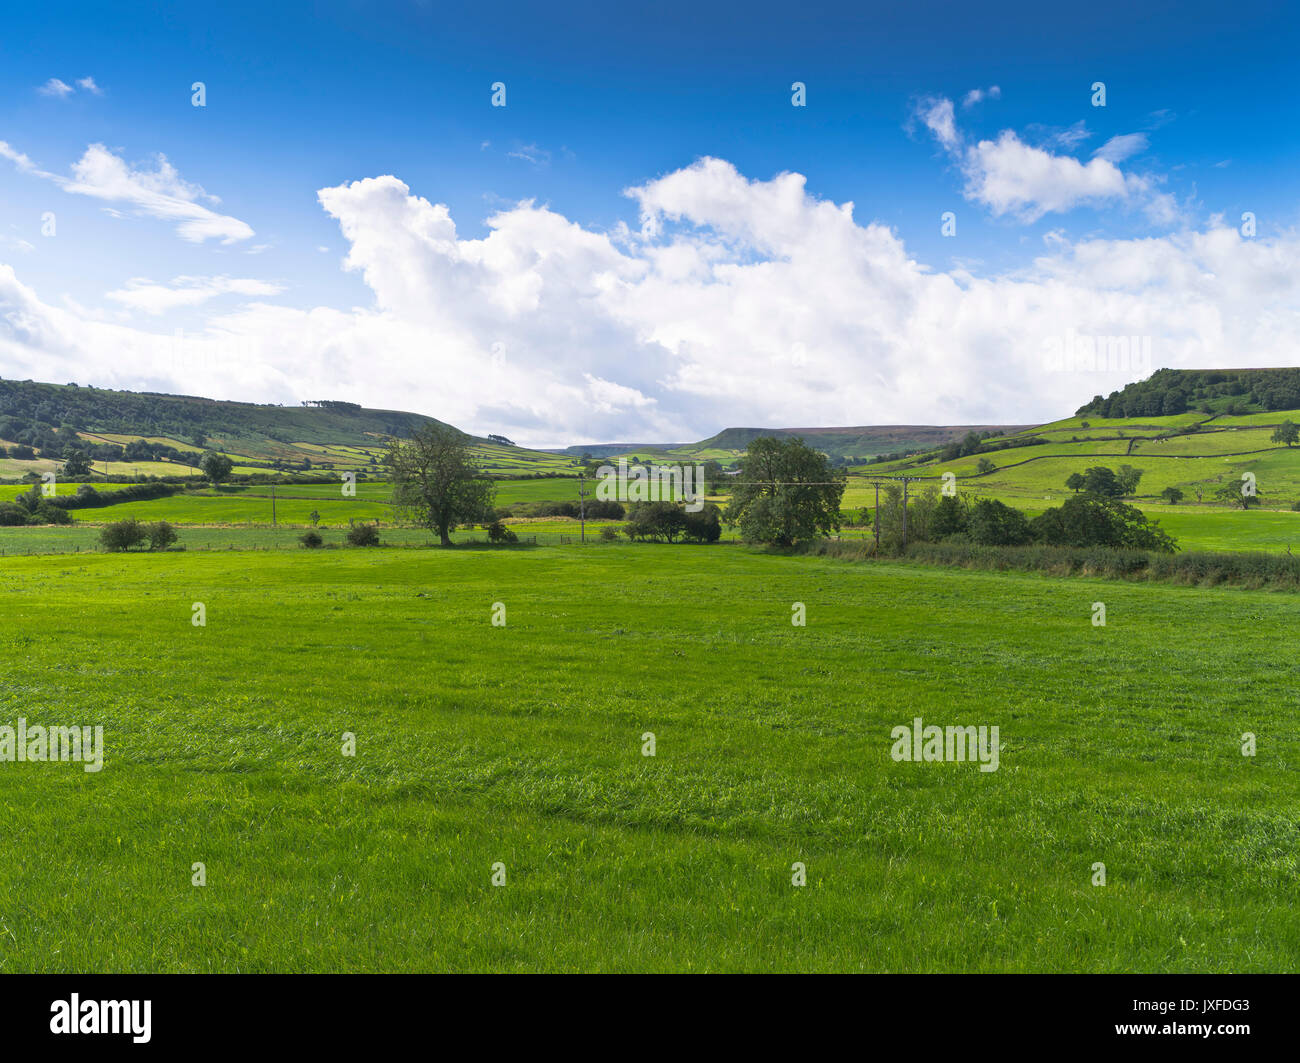 dh Esk Valley DANBY NORTH YORKSHIRE York moors Fields valley view of Danby Moor Stock Photo